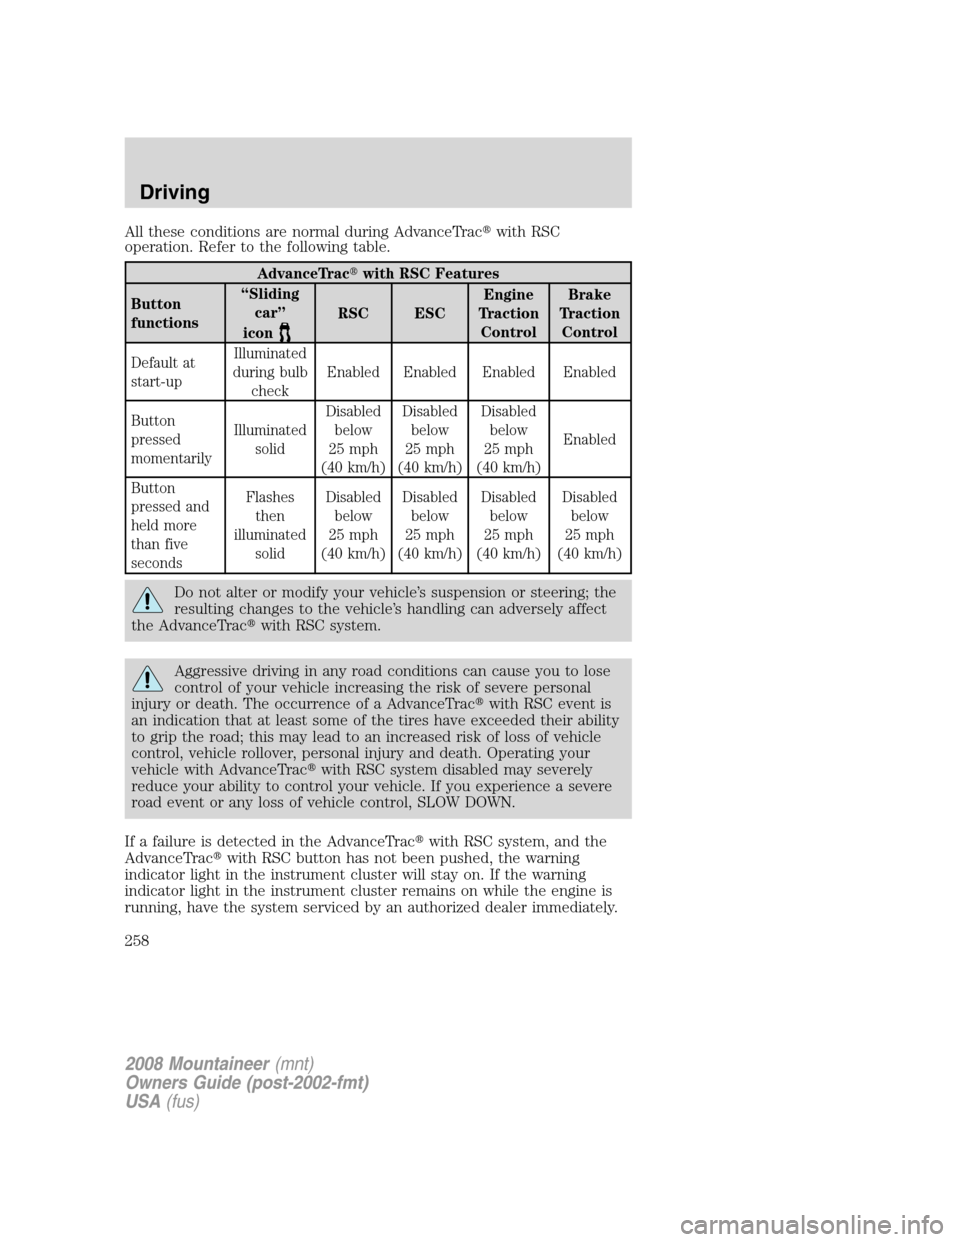 Mercury Mountaineer 2008  s Owners Guide All these conditions are normal during AdvanceTracwith RSC
operation. Refer to the following table.
AdvanceTracwith RSC Features
Button
functions“Sliding
car”
icon
RSC ESCEngine
Traction
Control